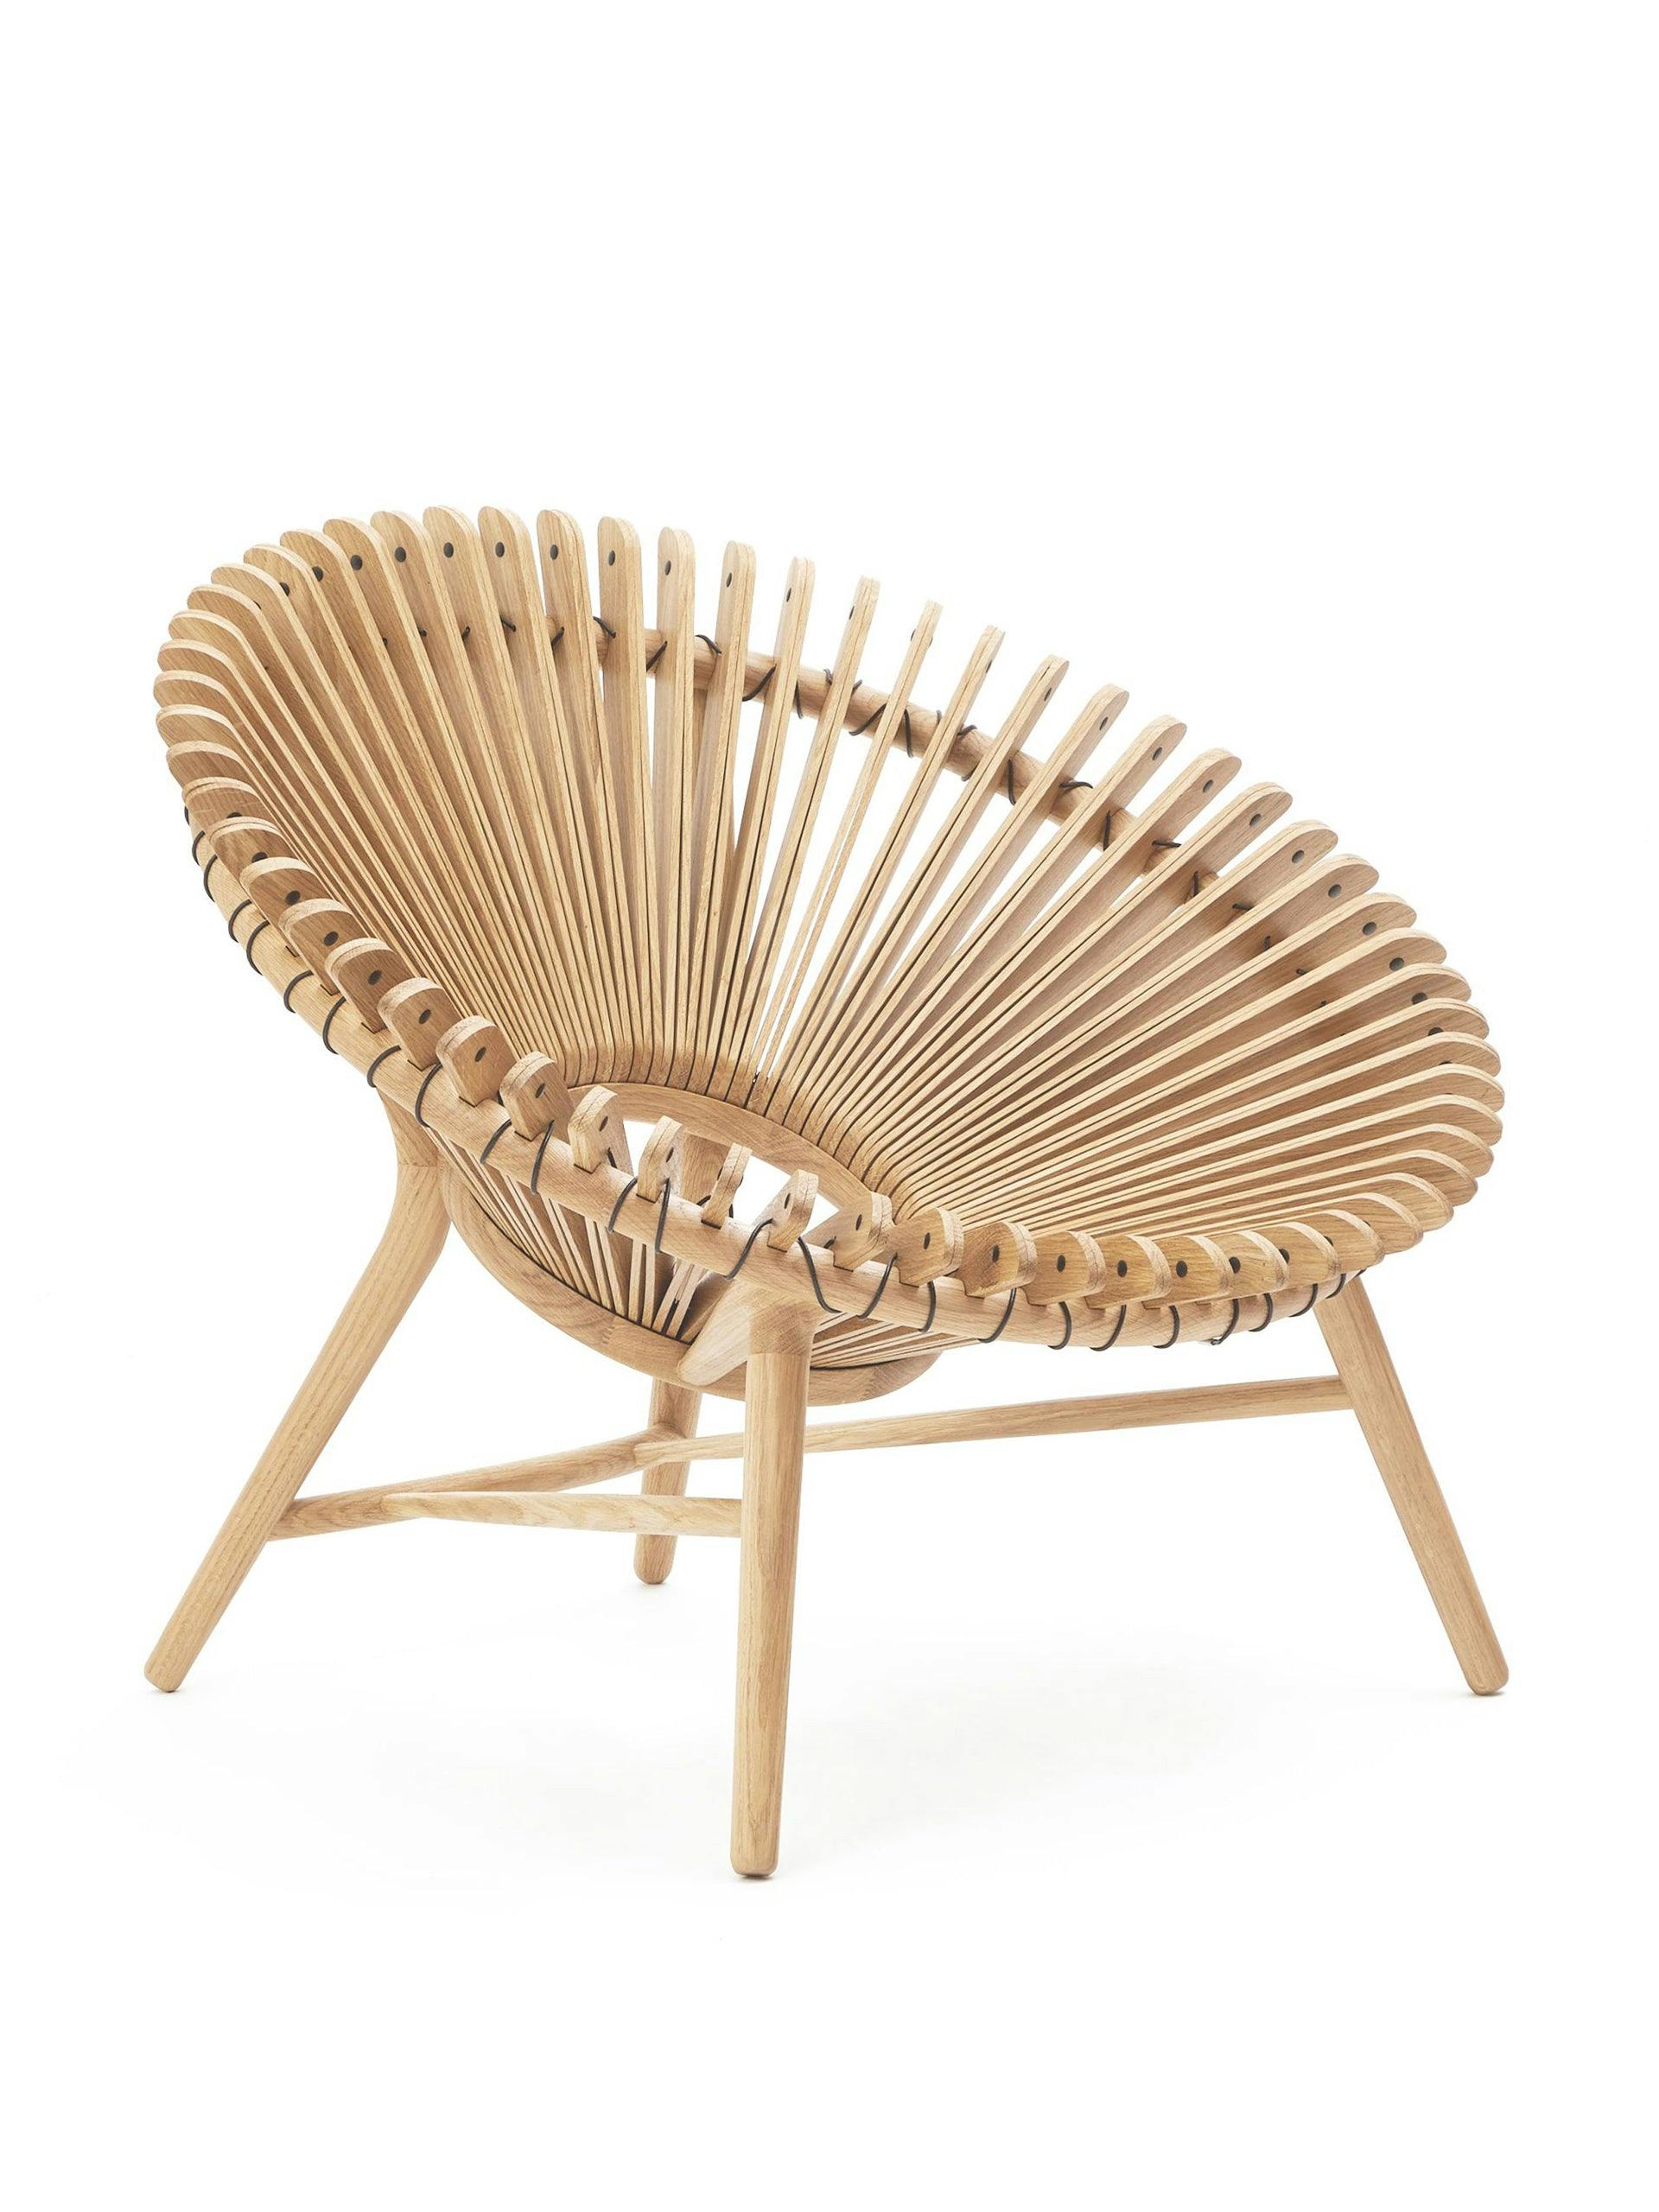 Stretched wood armchair